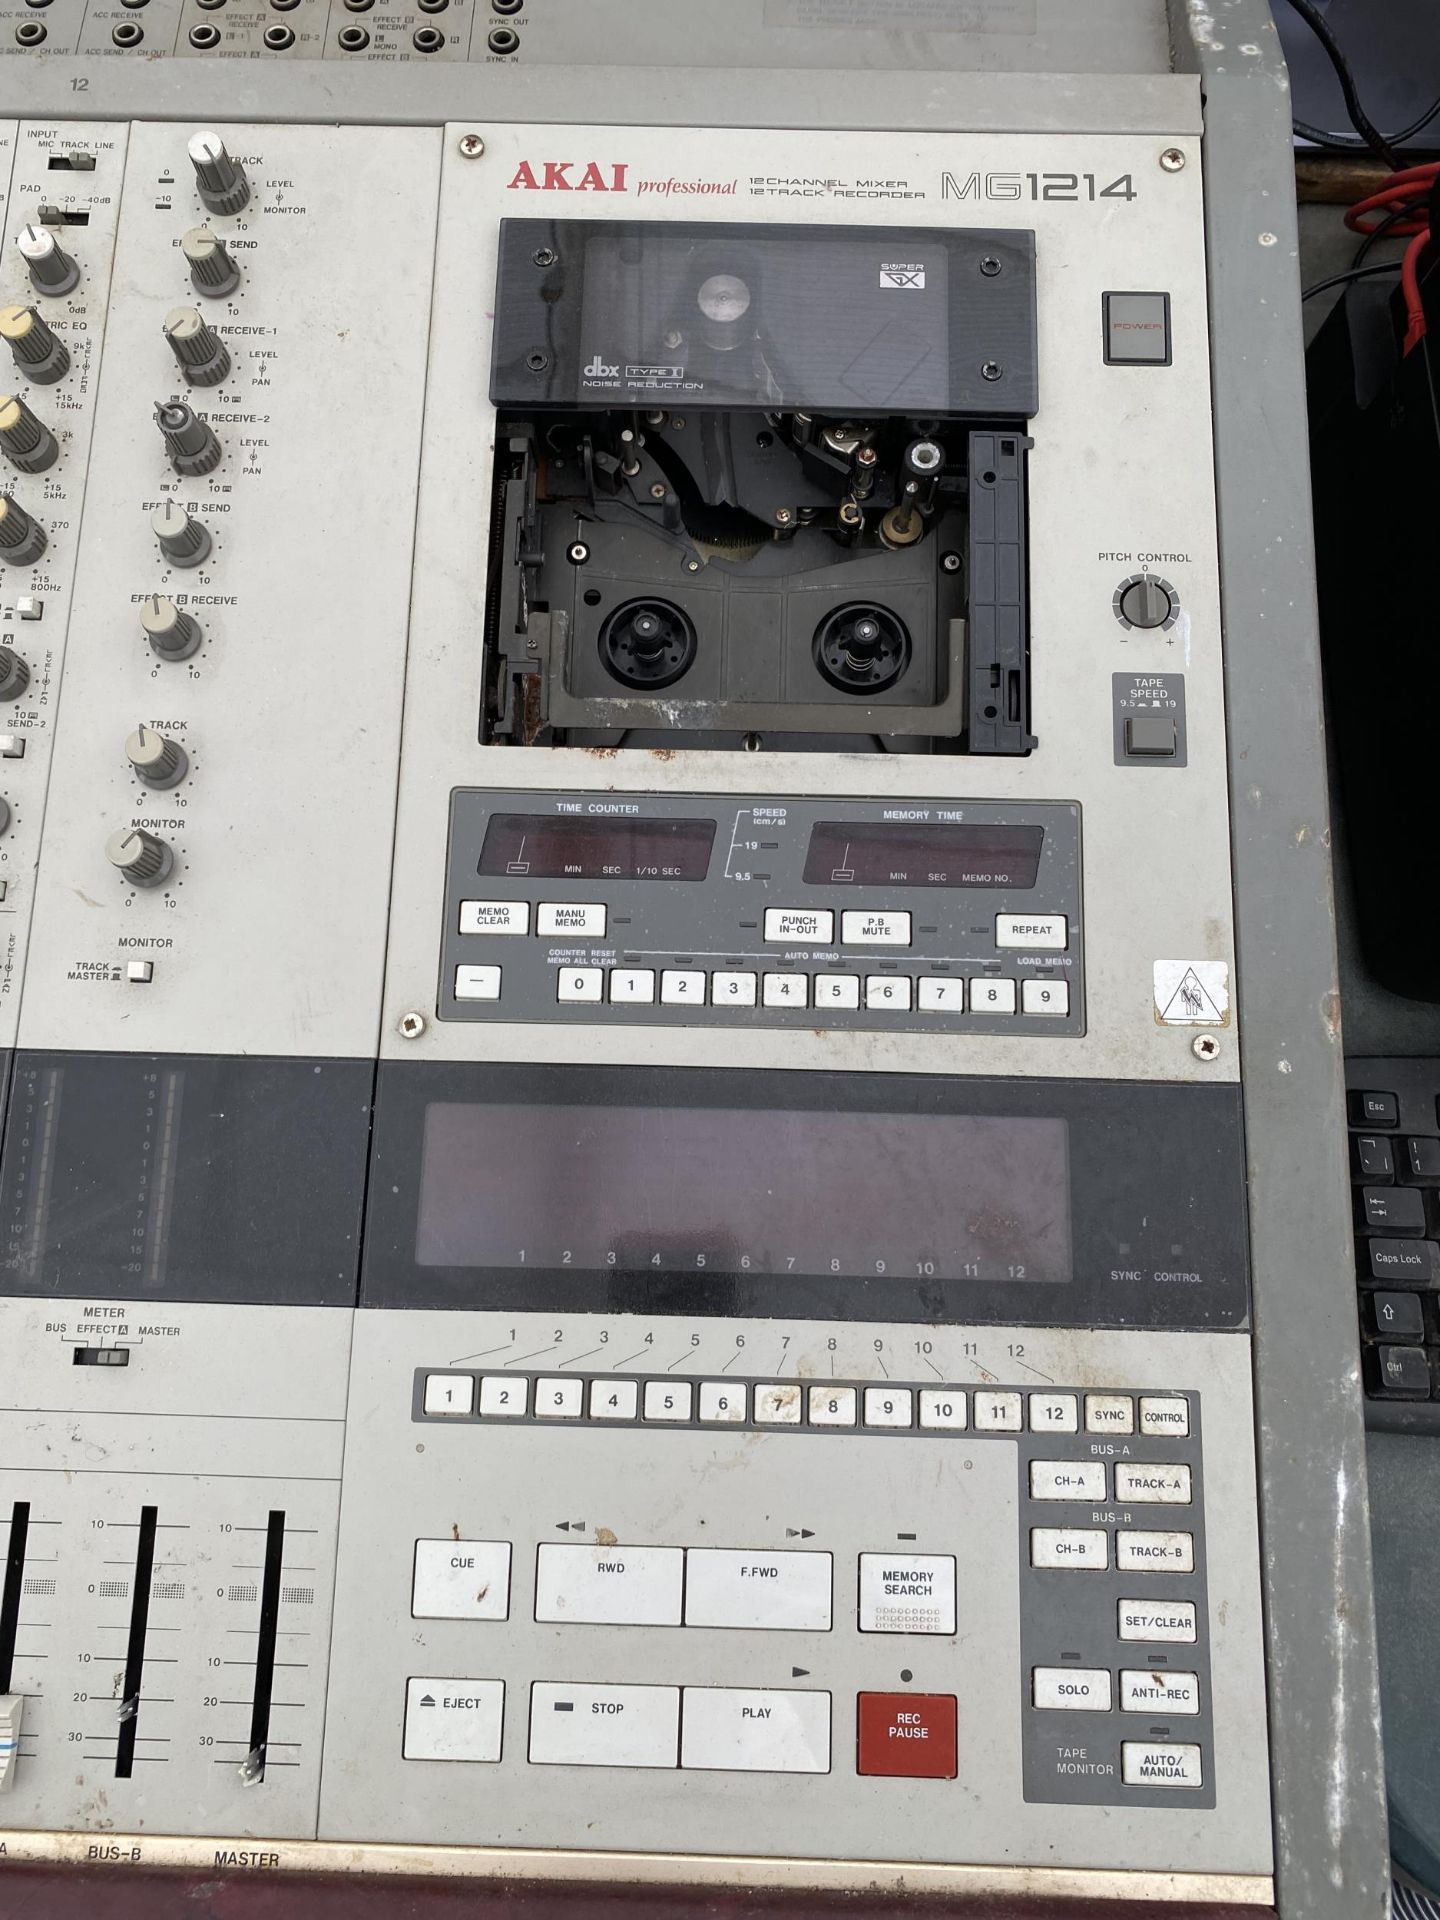 AN AKAI PROFESSIONAL CHANNEL MIXER - Image 2 of 2